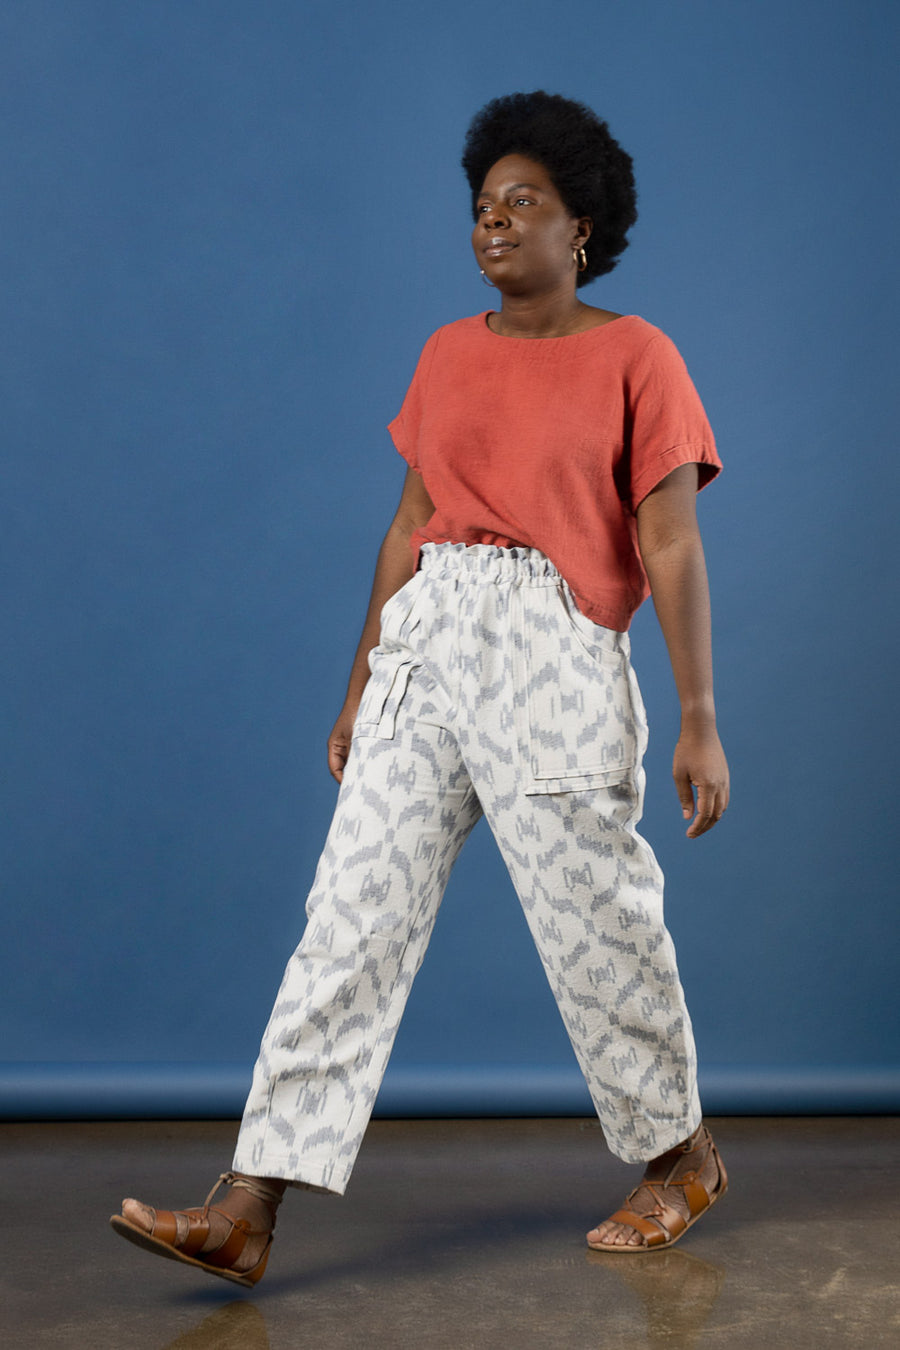 Add an Elastic Waist to Tailored Trousers for Extra Comfort - Threads